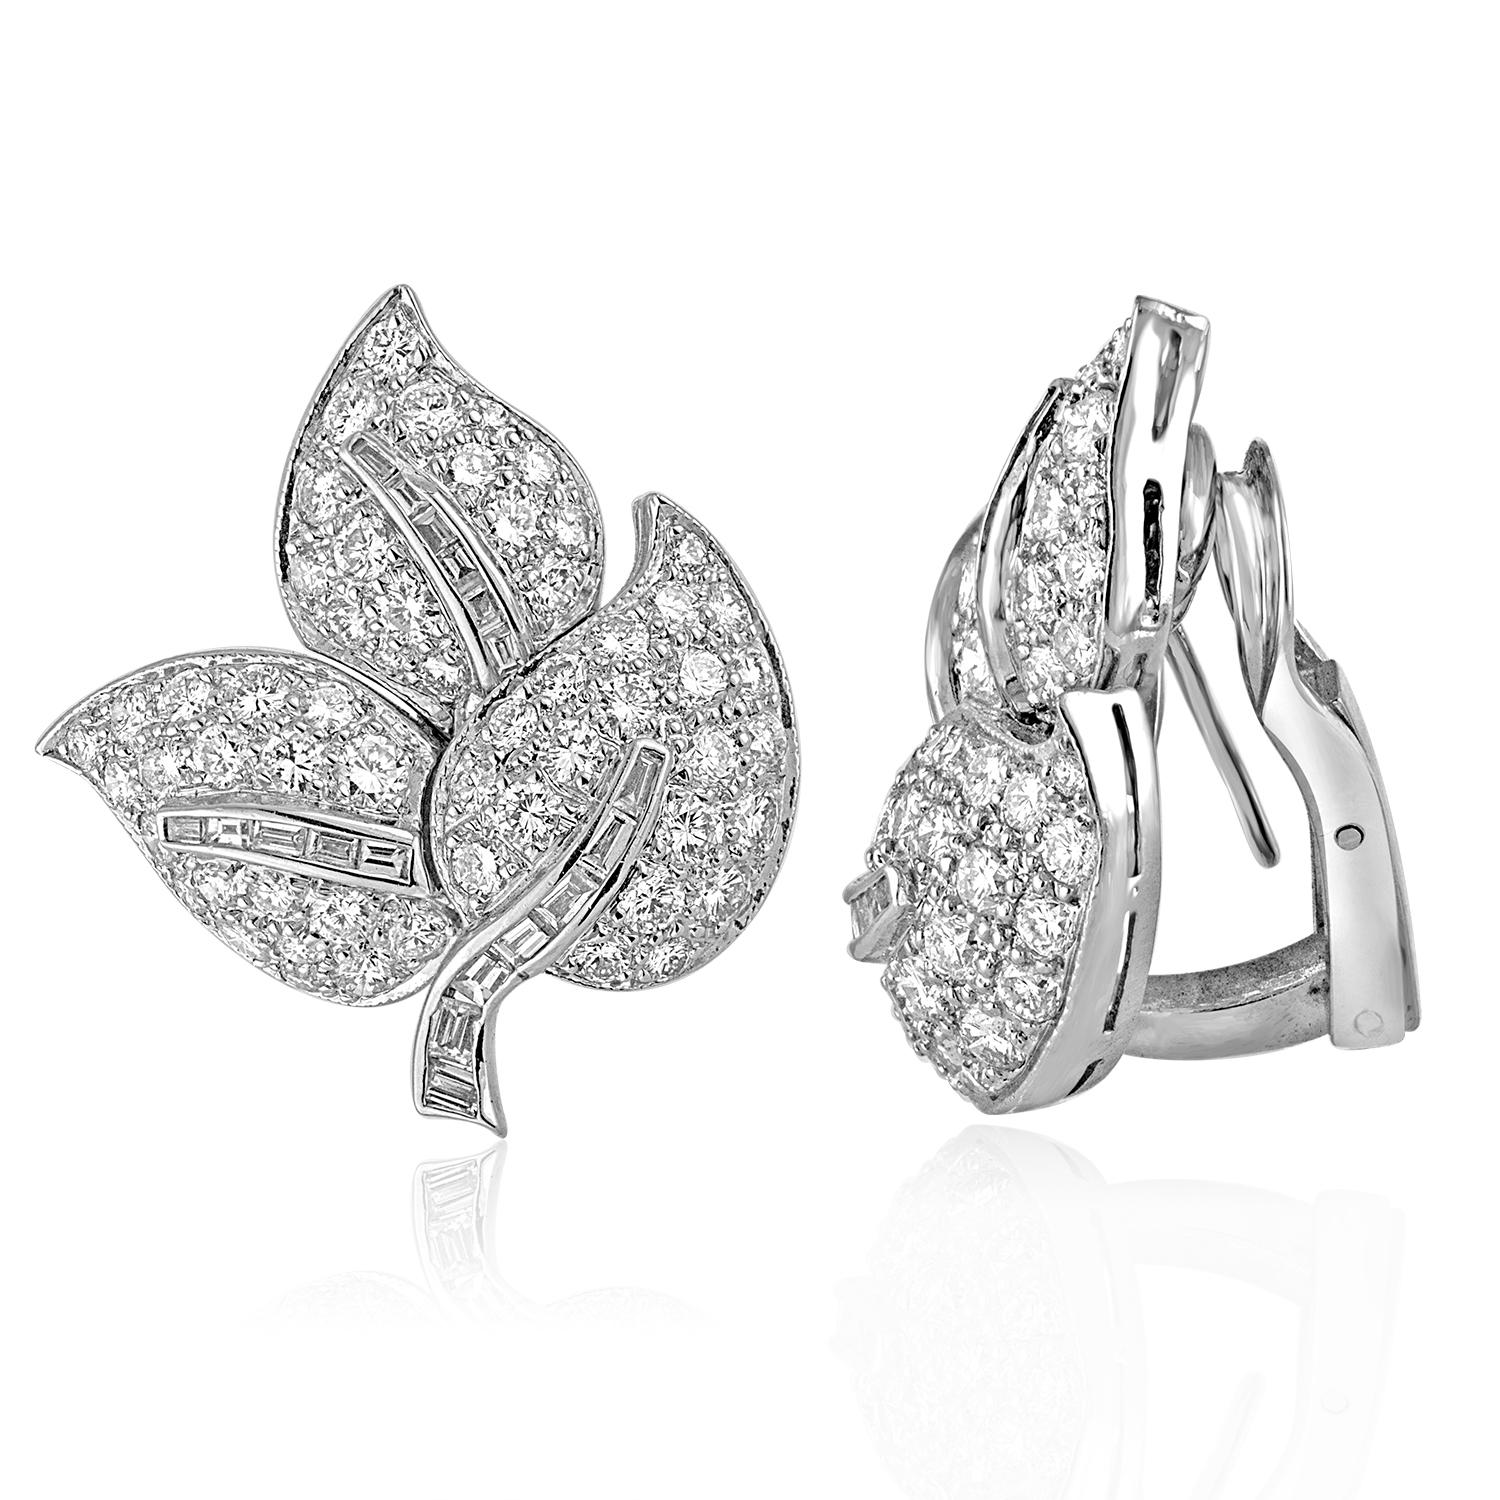 Very Stylish Evening Earrings.
The earrings are 18K White Gold.
There are 7.00 Carats F/G VS
The earrings measure 1